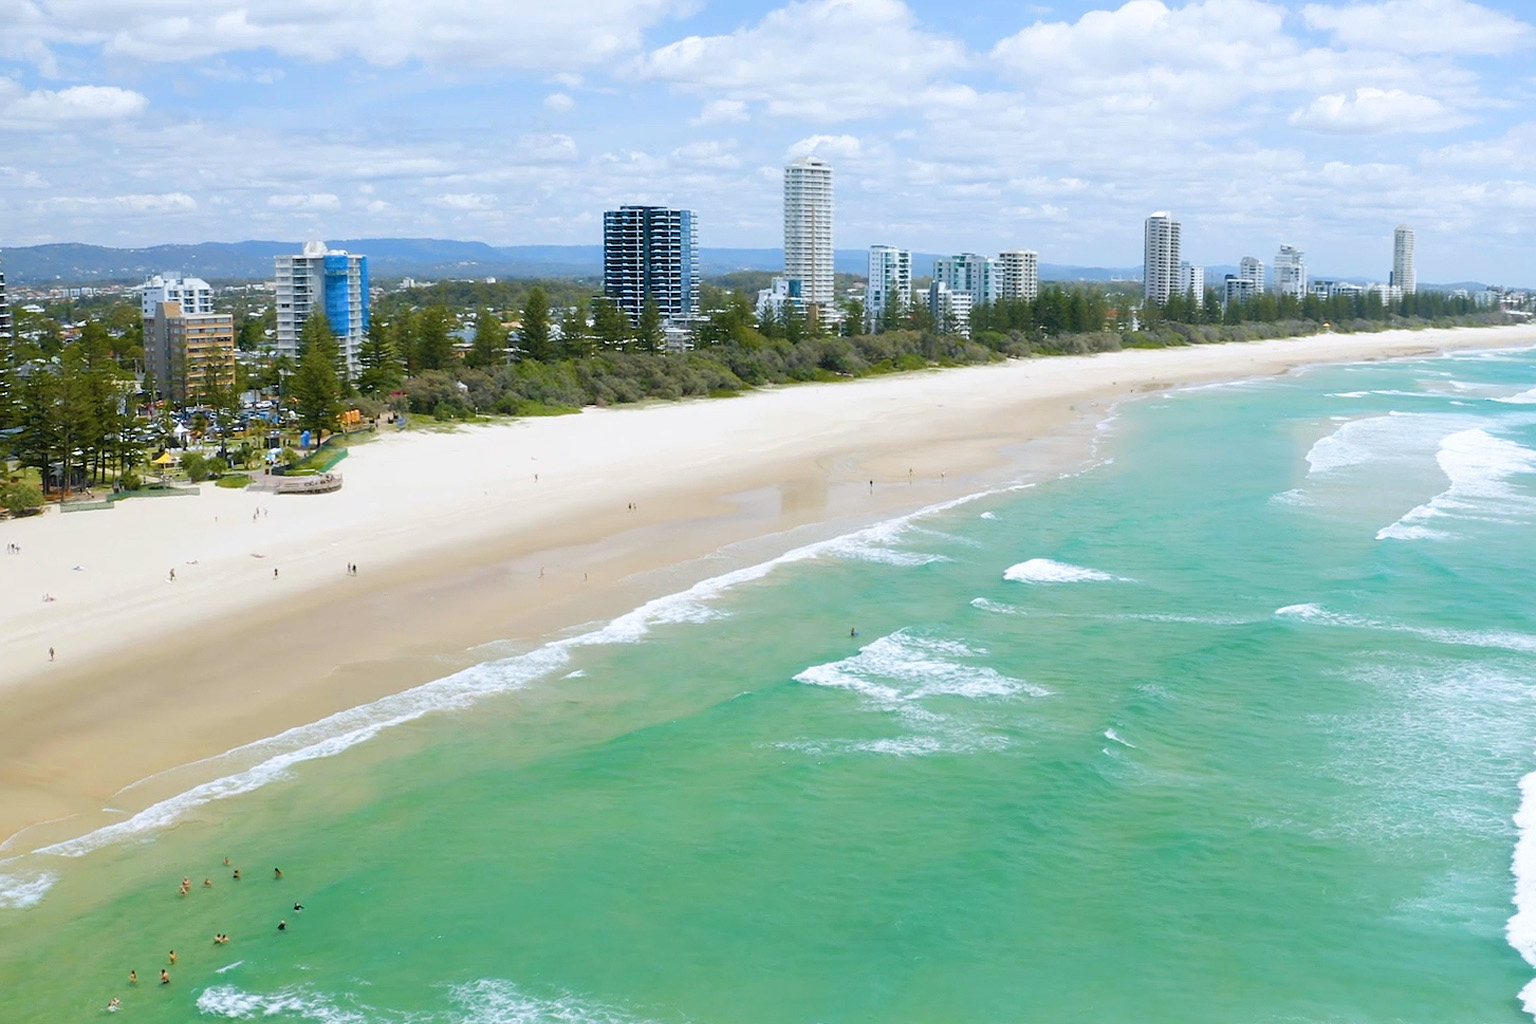 Aerial view of Gold coast from above the ocean, looking back over high-rise buildings.